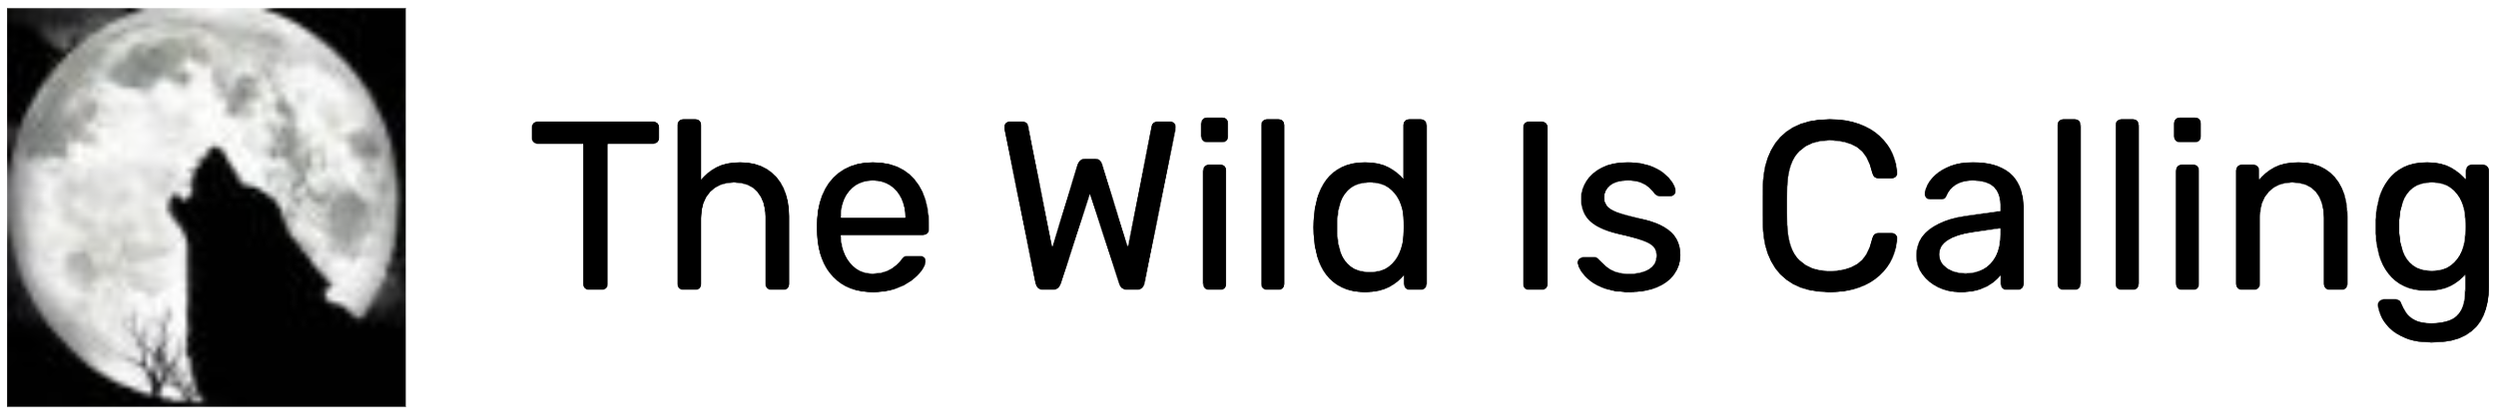 The Wild is Calling 2.png